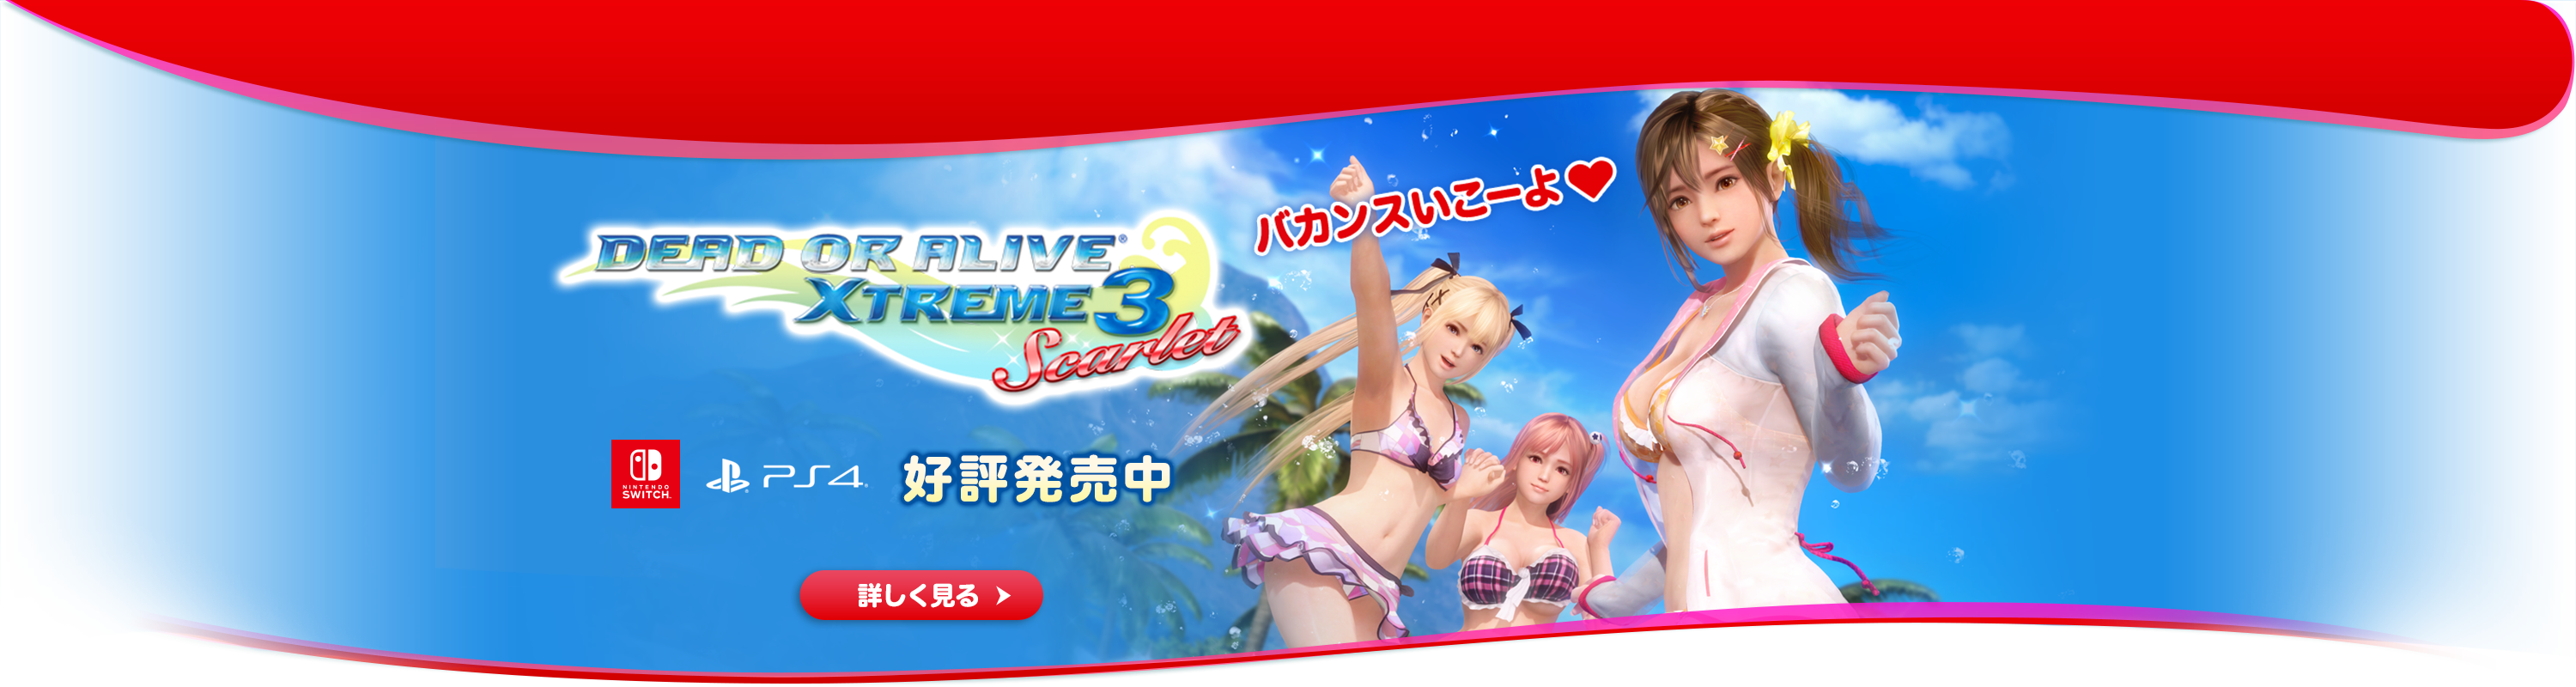 DEAD OR ALIVE Xtreme3